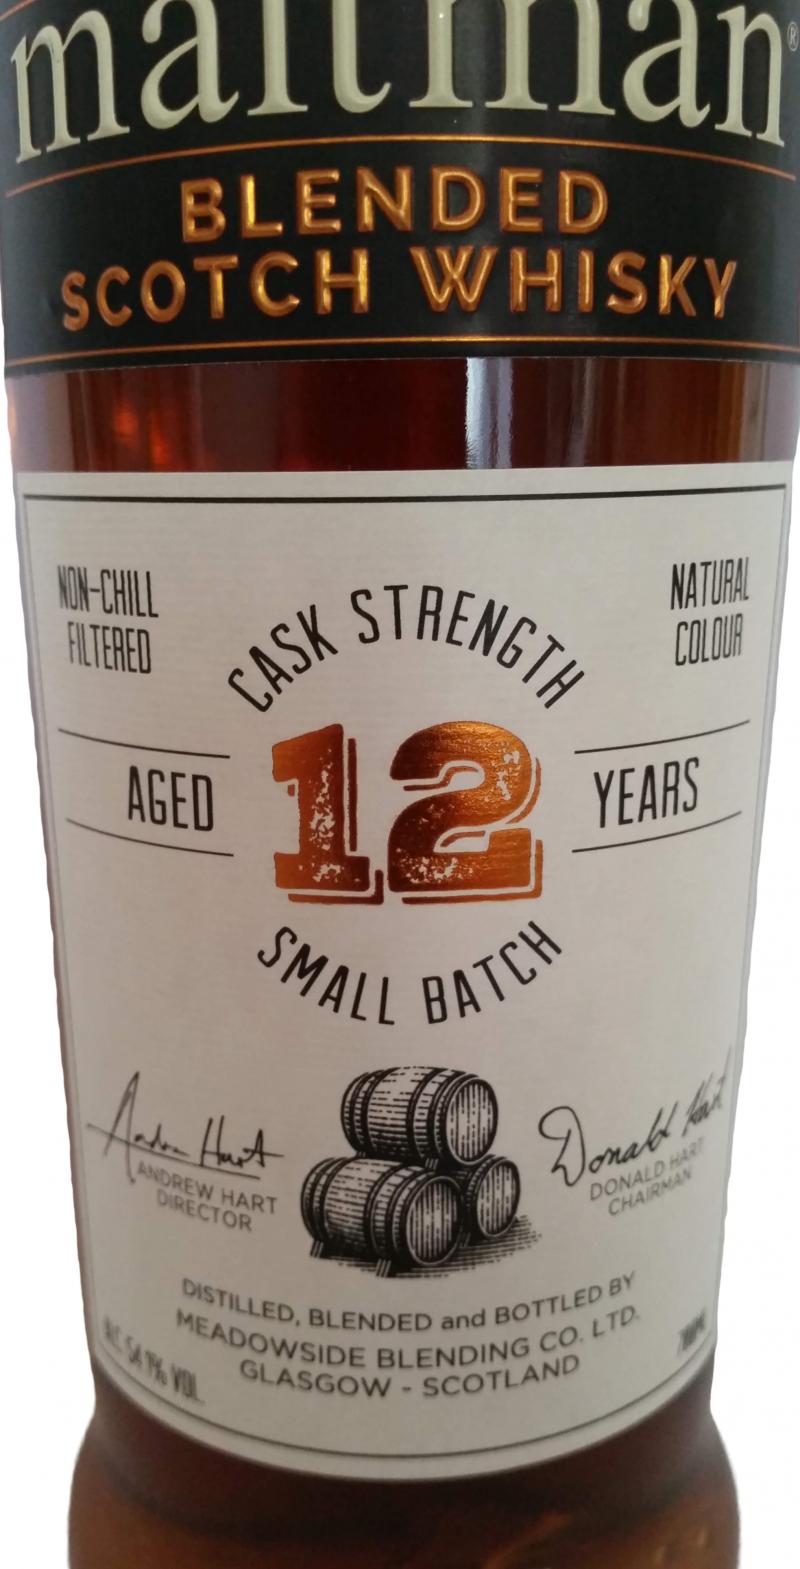 Blended Scotch Whisky 12-year-old MBl